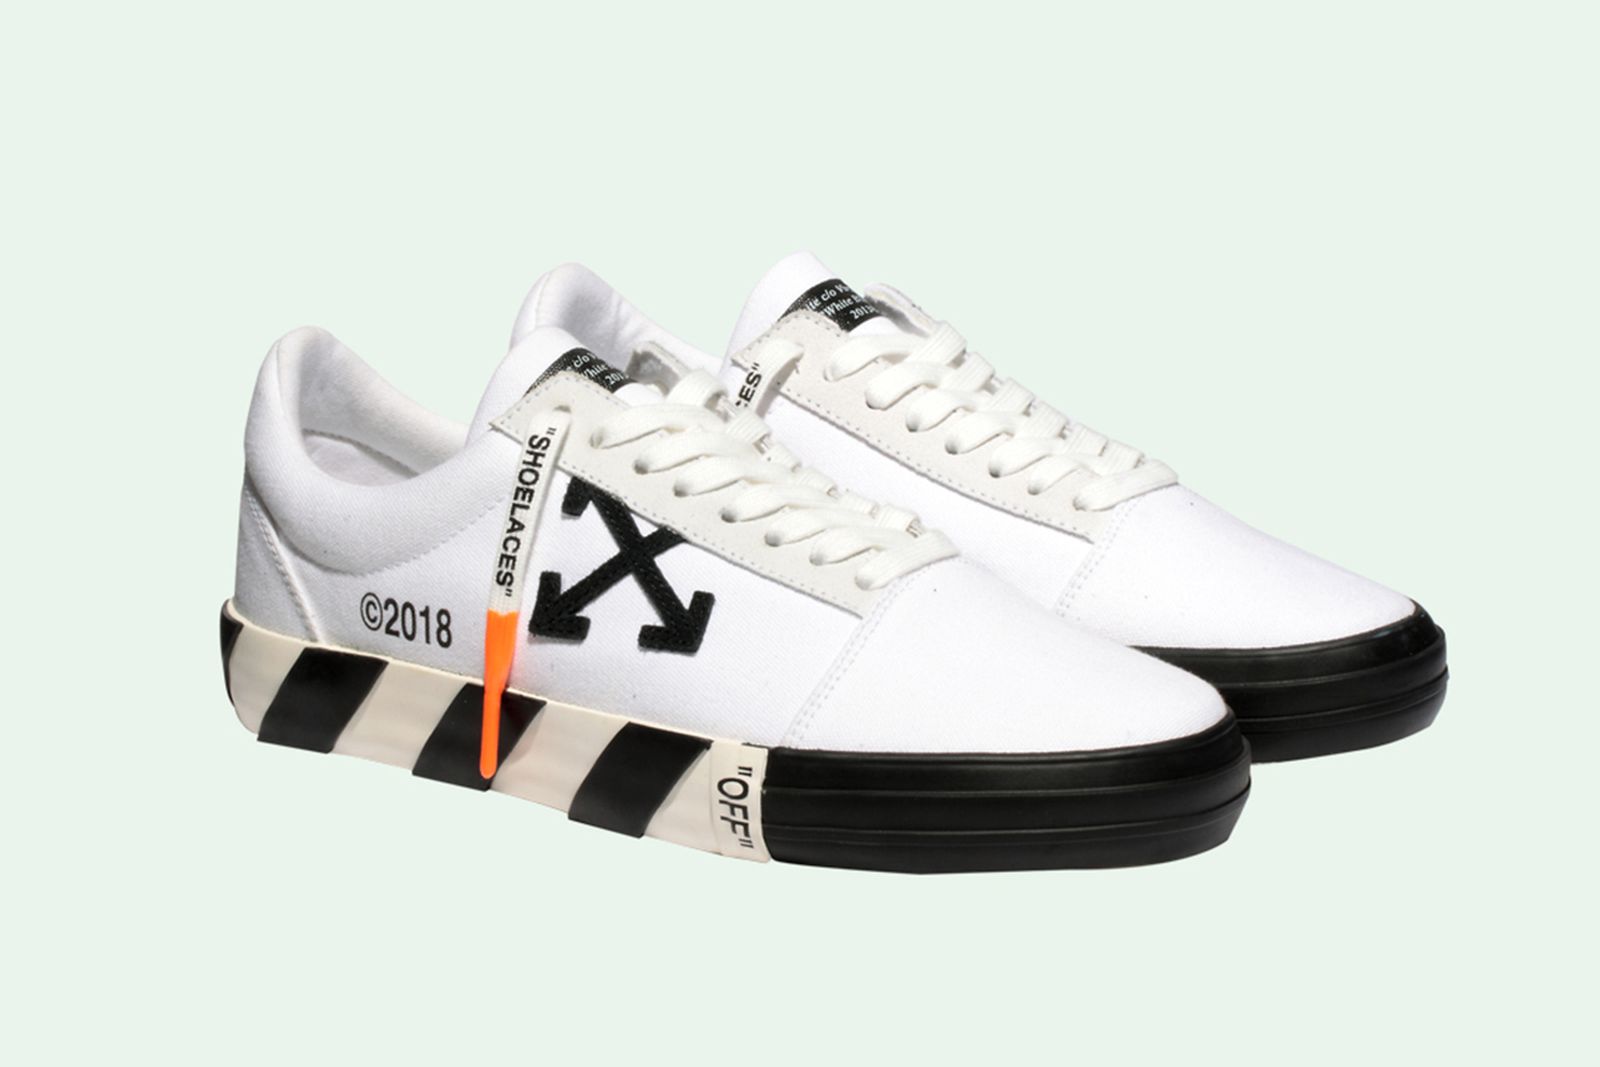 These OFF-WHITE Sneakers are the Closest Thing to a Vans Collab